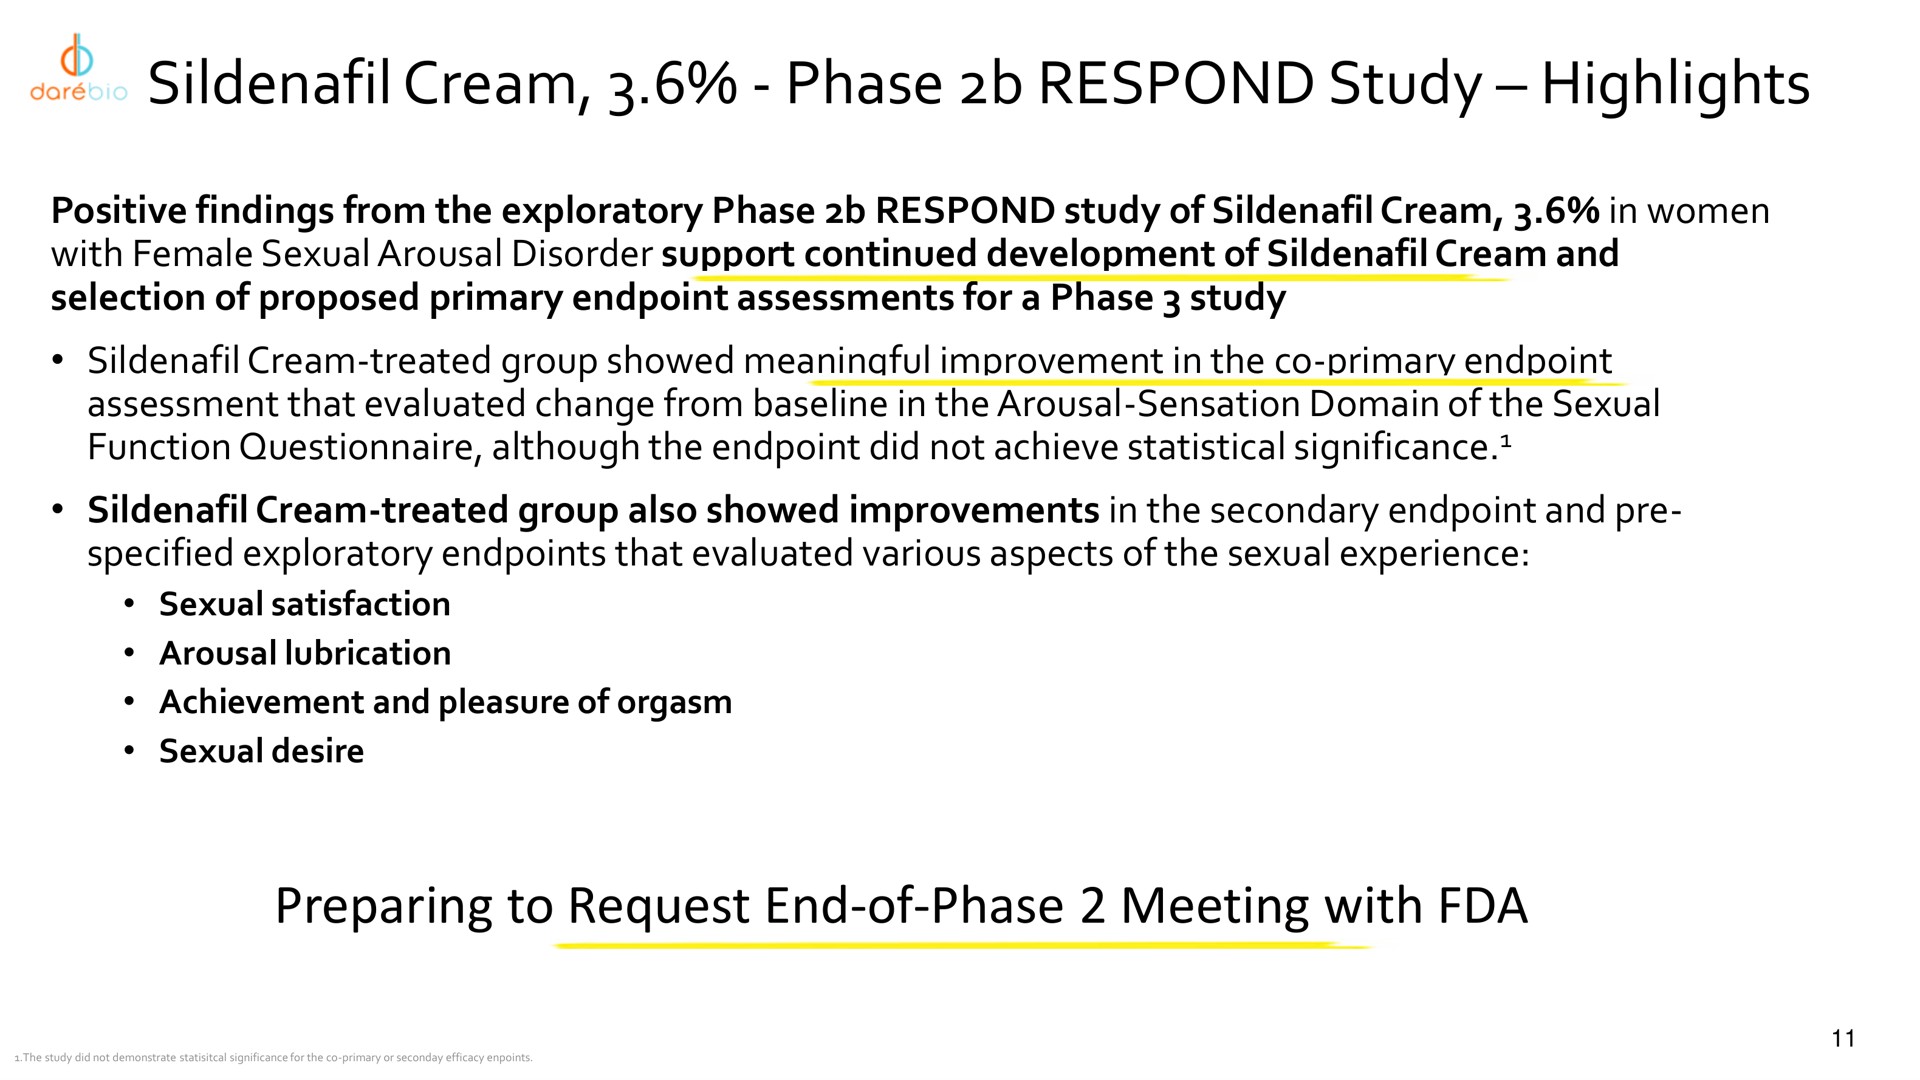 cream phase respond study highlights preparing to request end of phase meeting with | Dare Bioscience